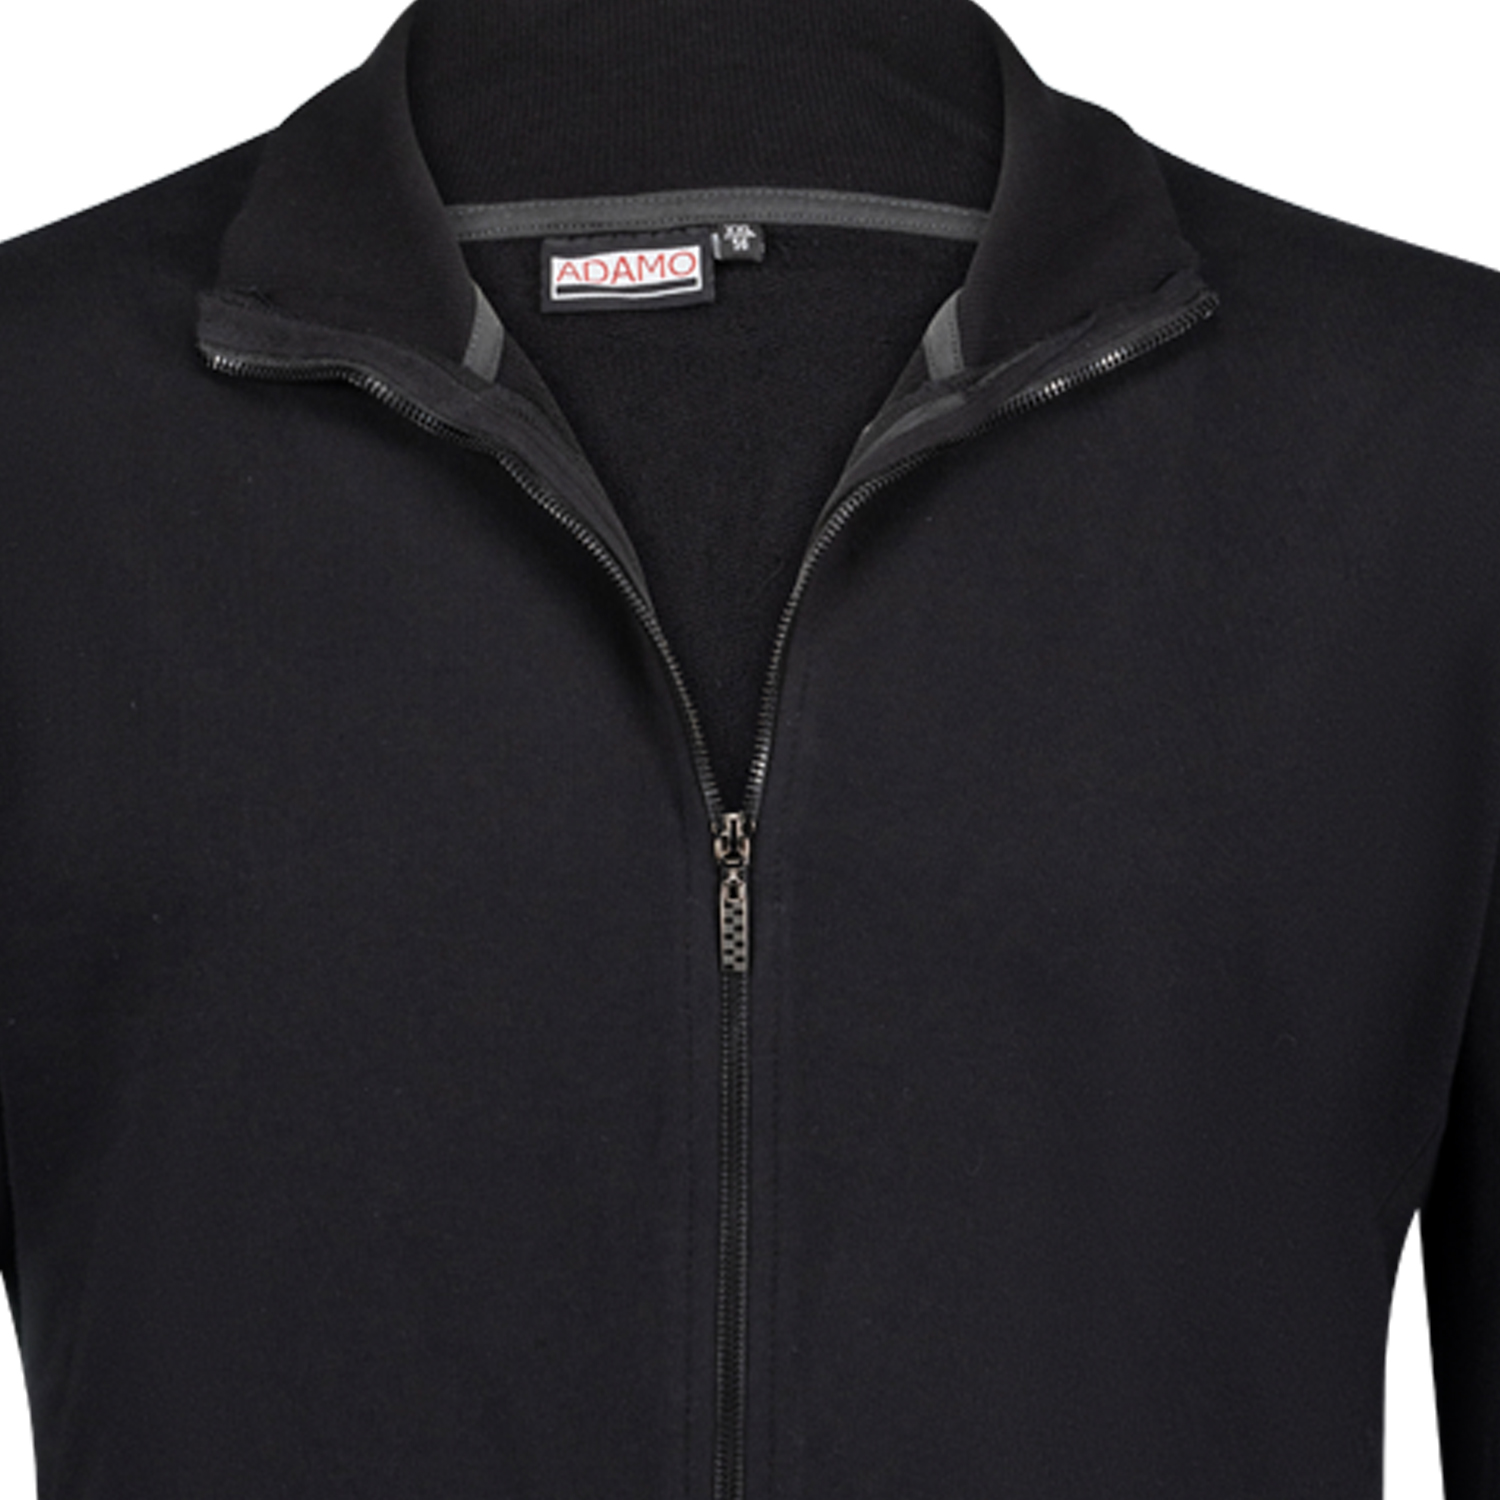 Sweatjacket TALL FIT in black for men series Tokio by ADAMO in oversizes up to 5XLT